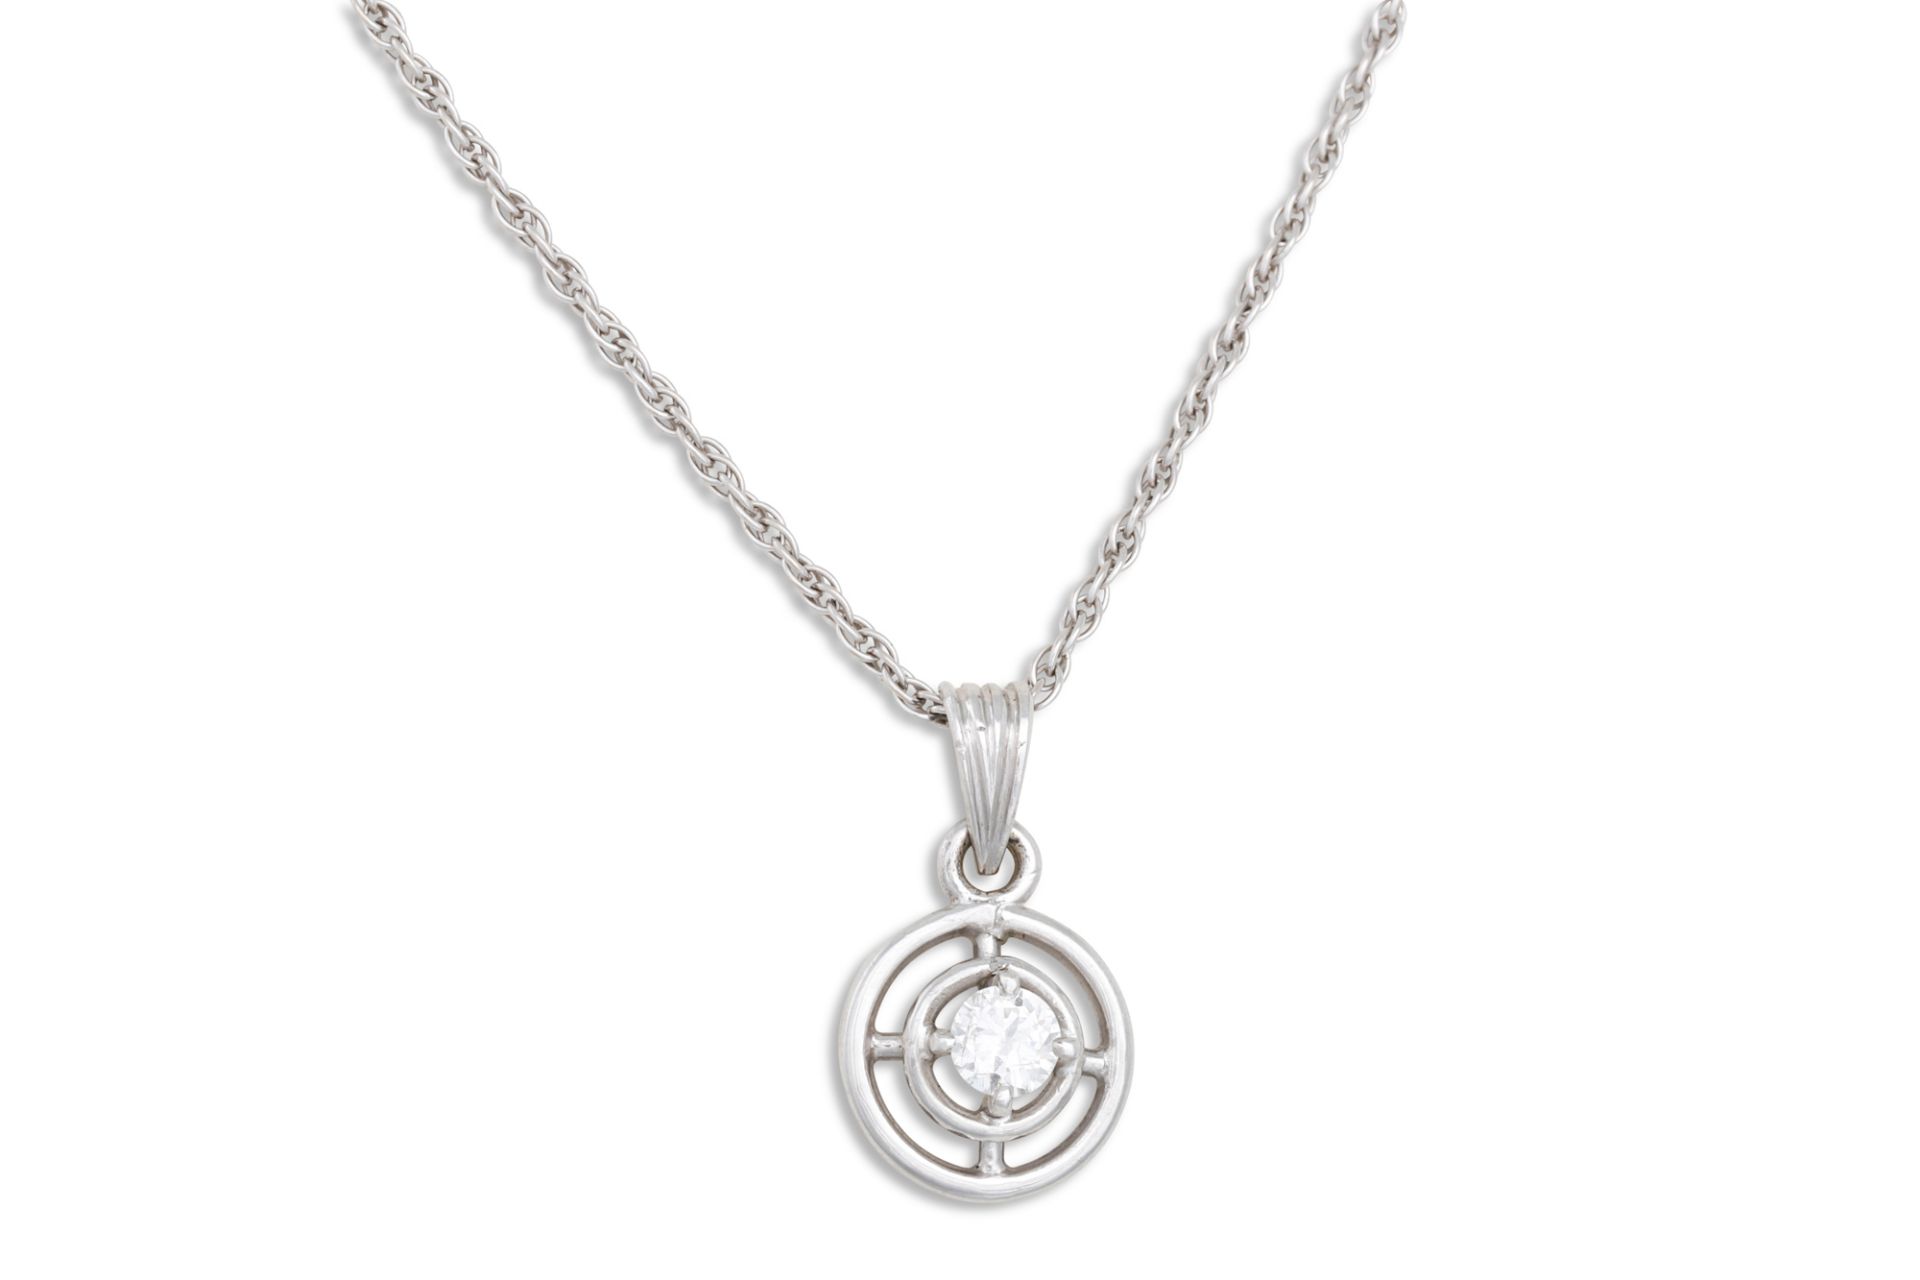 A VINTAGE DIAMOND SOLITAIRE PENDANT, the diamond in a white gold circular openwork mount, on a